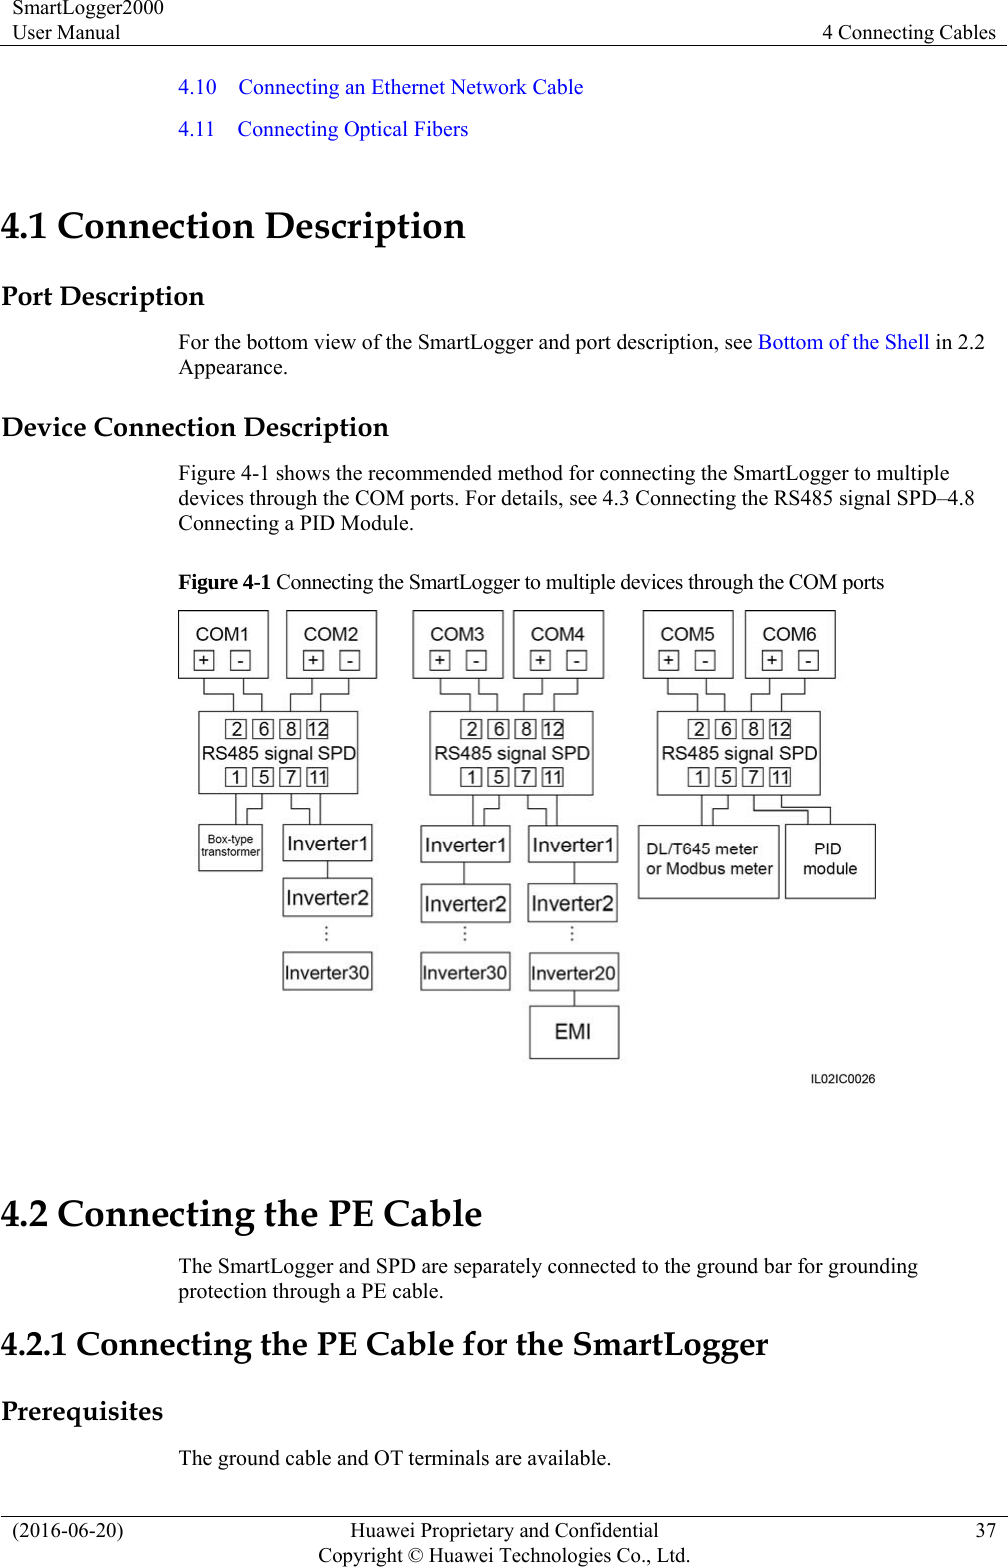 SmartLogger2000 User Manual  4 Connecting Cables (2016-06-20)  Huawei Proprietary and Confidential         Copyright © Huawei Technologies Co., Ltd.37 4.10    Connecting an Ethernet Network Cable 4.11    Connecting Optical Fibers 4.1 Connection Description Port Description For the bottom view of the SmartLogger and port description, see Bottom of the Shell in 2.2 Appearance. Device Connection Description Figure 4-1 shows the recommended method for connecting the SmartLogger to multiple devices through the COM ports. For details, see 4.3 Connecting the RS485 signal SPD–4.8 Connecting a PID Module. Figure 4-1 Connecting the SmartLogger to multiple devices through the COM ports   4.2 Connecting the PE Cable The SmartLogger and SPD are separately connected to the ground bar for grounding protection through a PE cable.   4.2.1 Connecting the PE Cable for the SmartLogger Prerequisites The ground cable and OT terminals are available. 